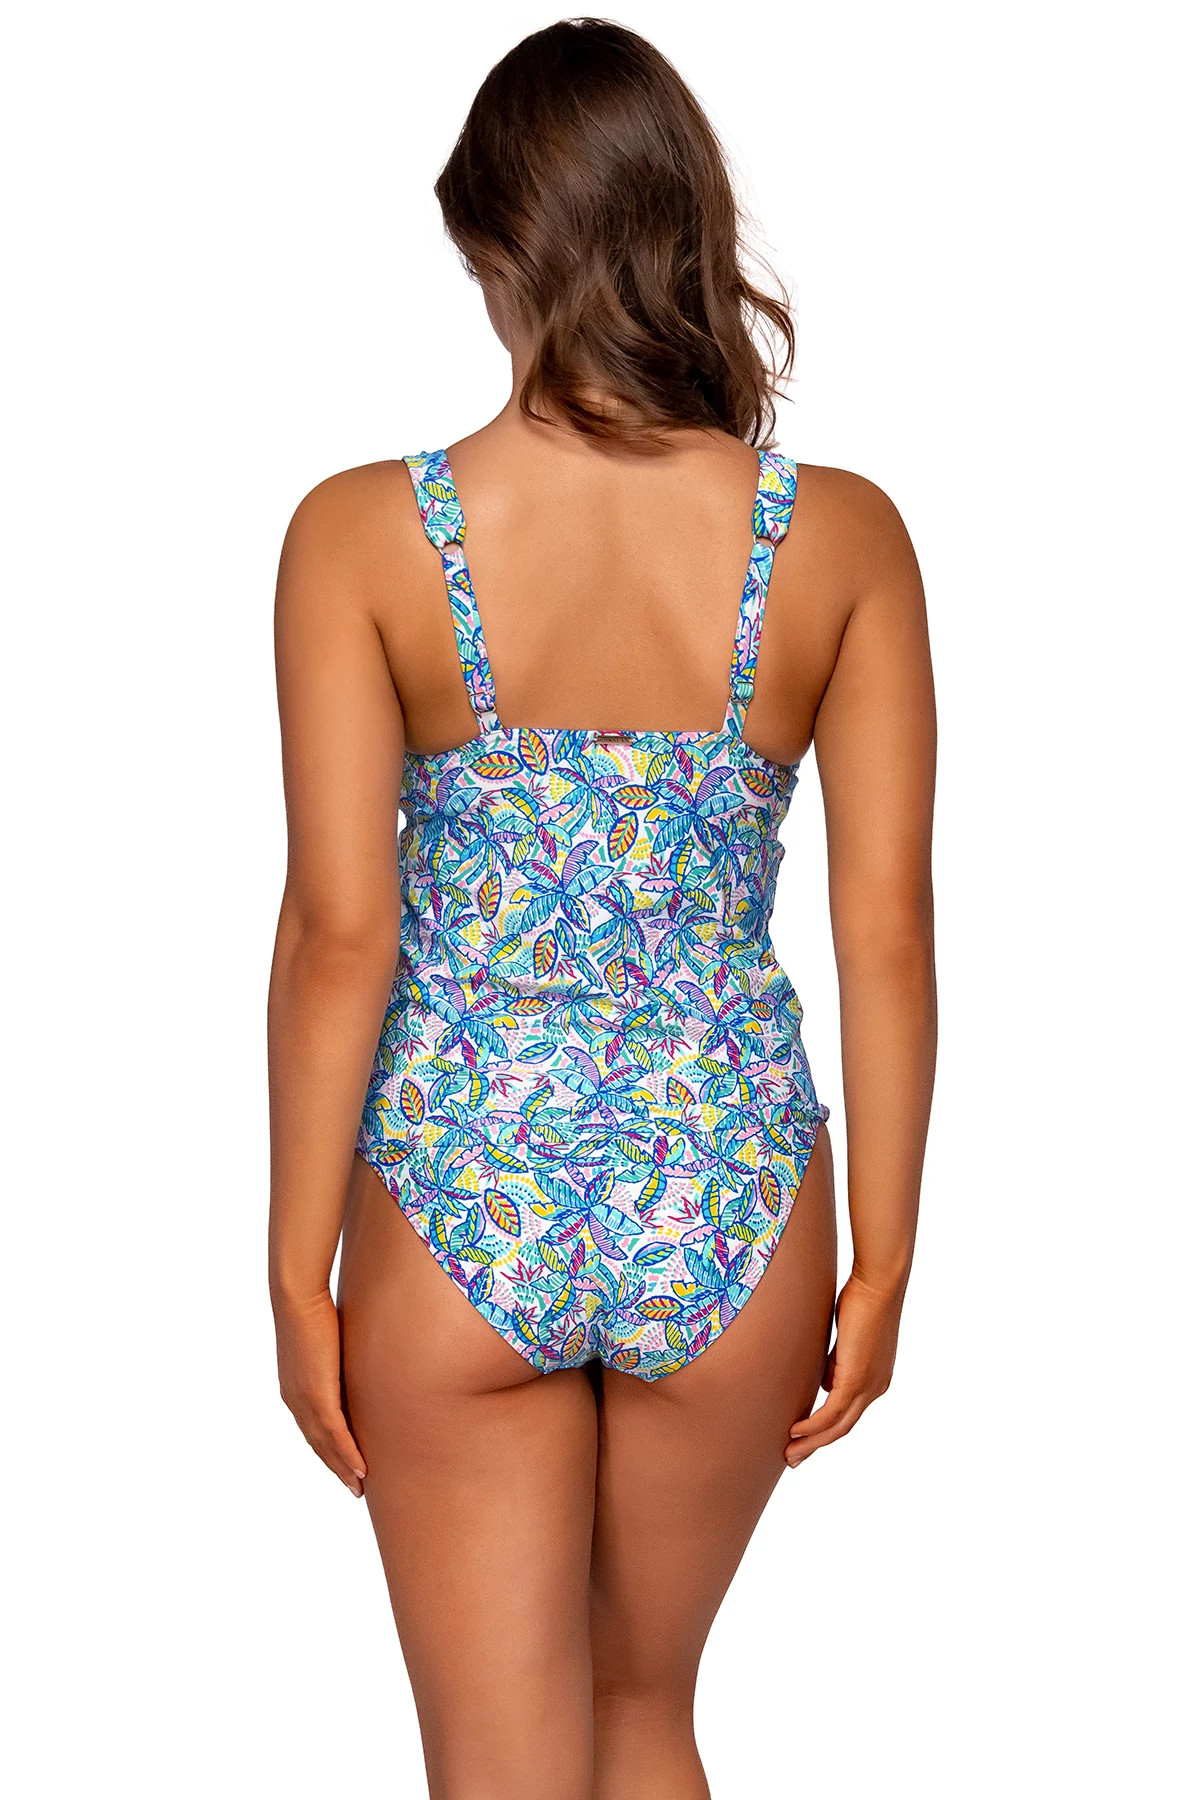 RAINBOW FALLS Elsie Underwire Tankini Top (E-H Cup) image number 2